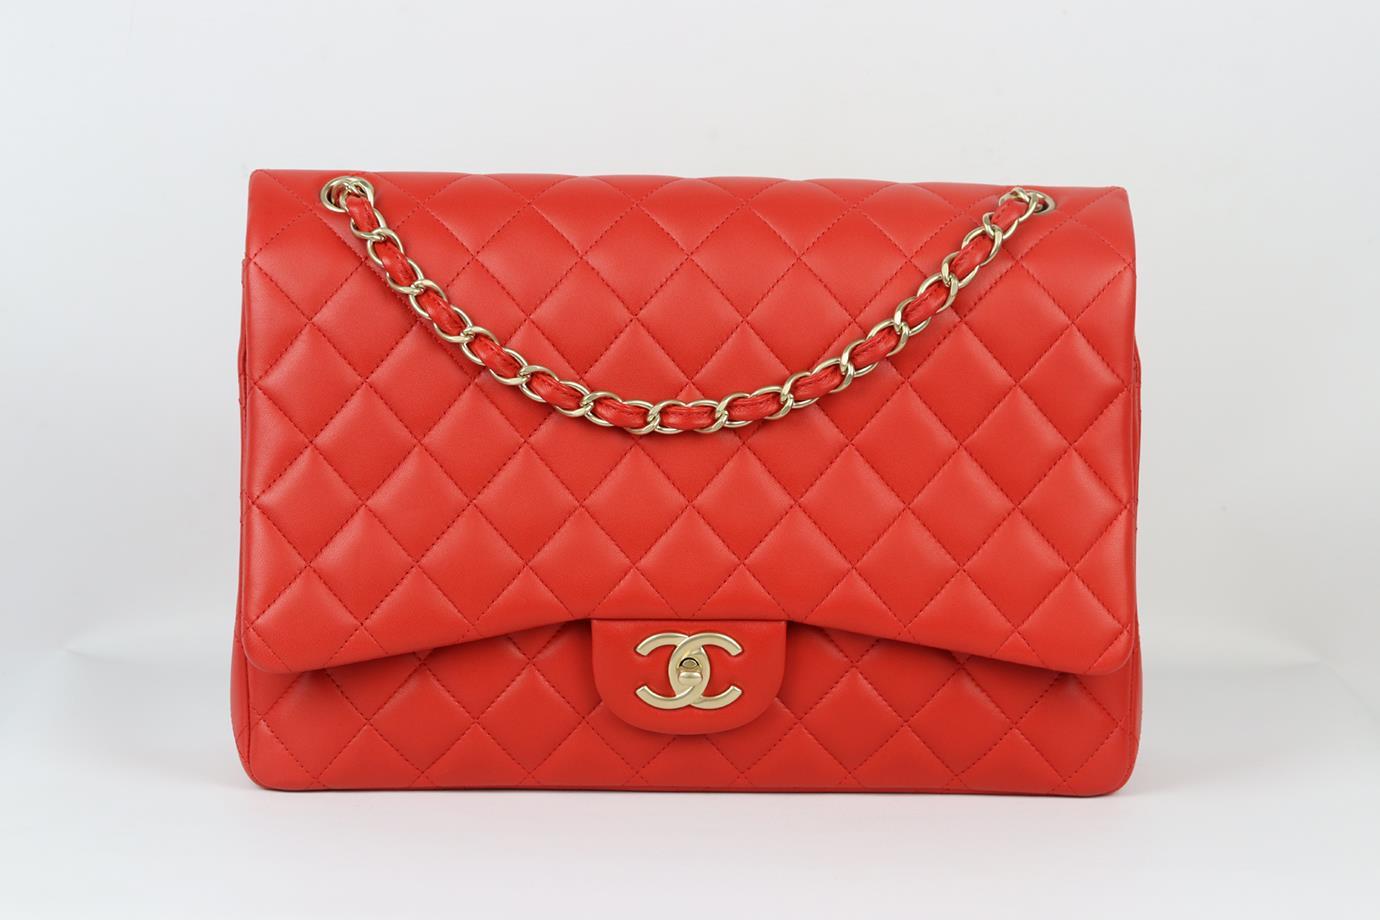 Chanel 2012 Maxi Classic quilted leather double flap shoulder bag. Made from red quilted leather with matching red leather interior and antiqued gold-tone hardware and chain shoulder straps. Red. Twist lock fastening at front. Does not come with